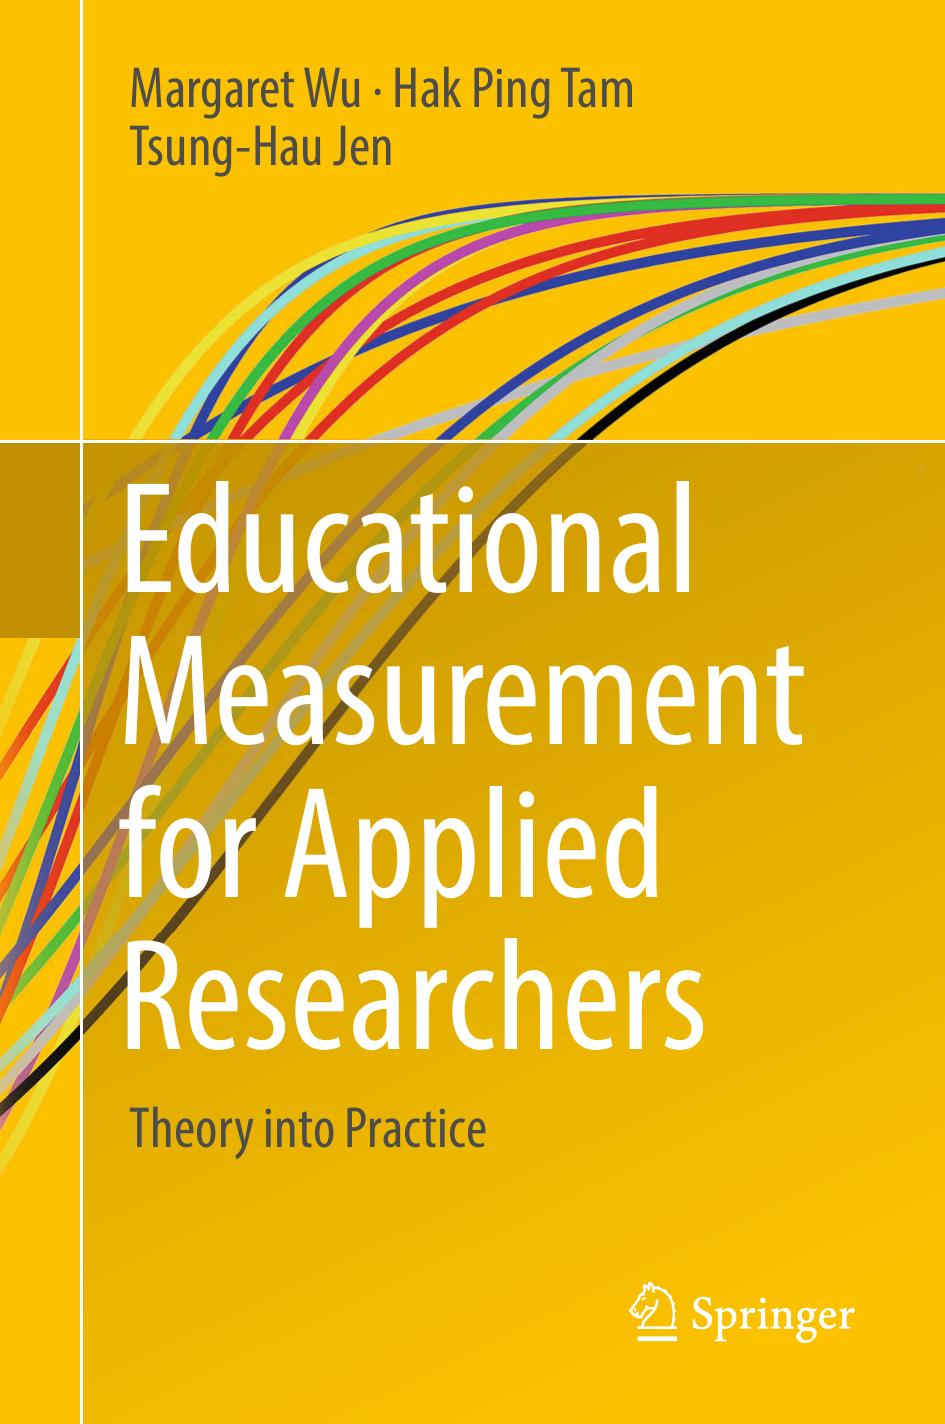 Educational Measurement for Applied Researchers Theory into Practice 2016